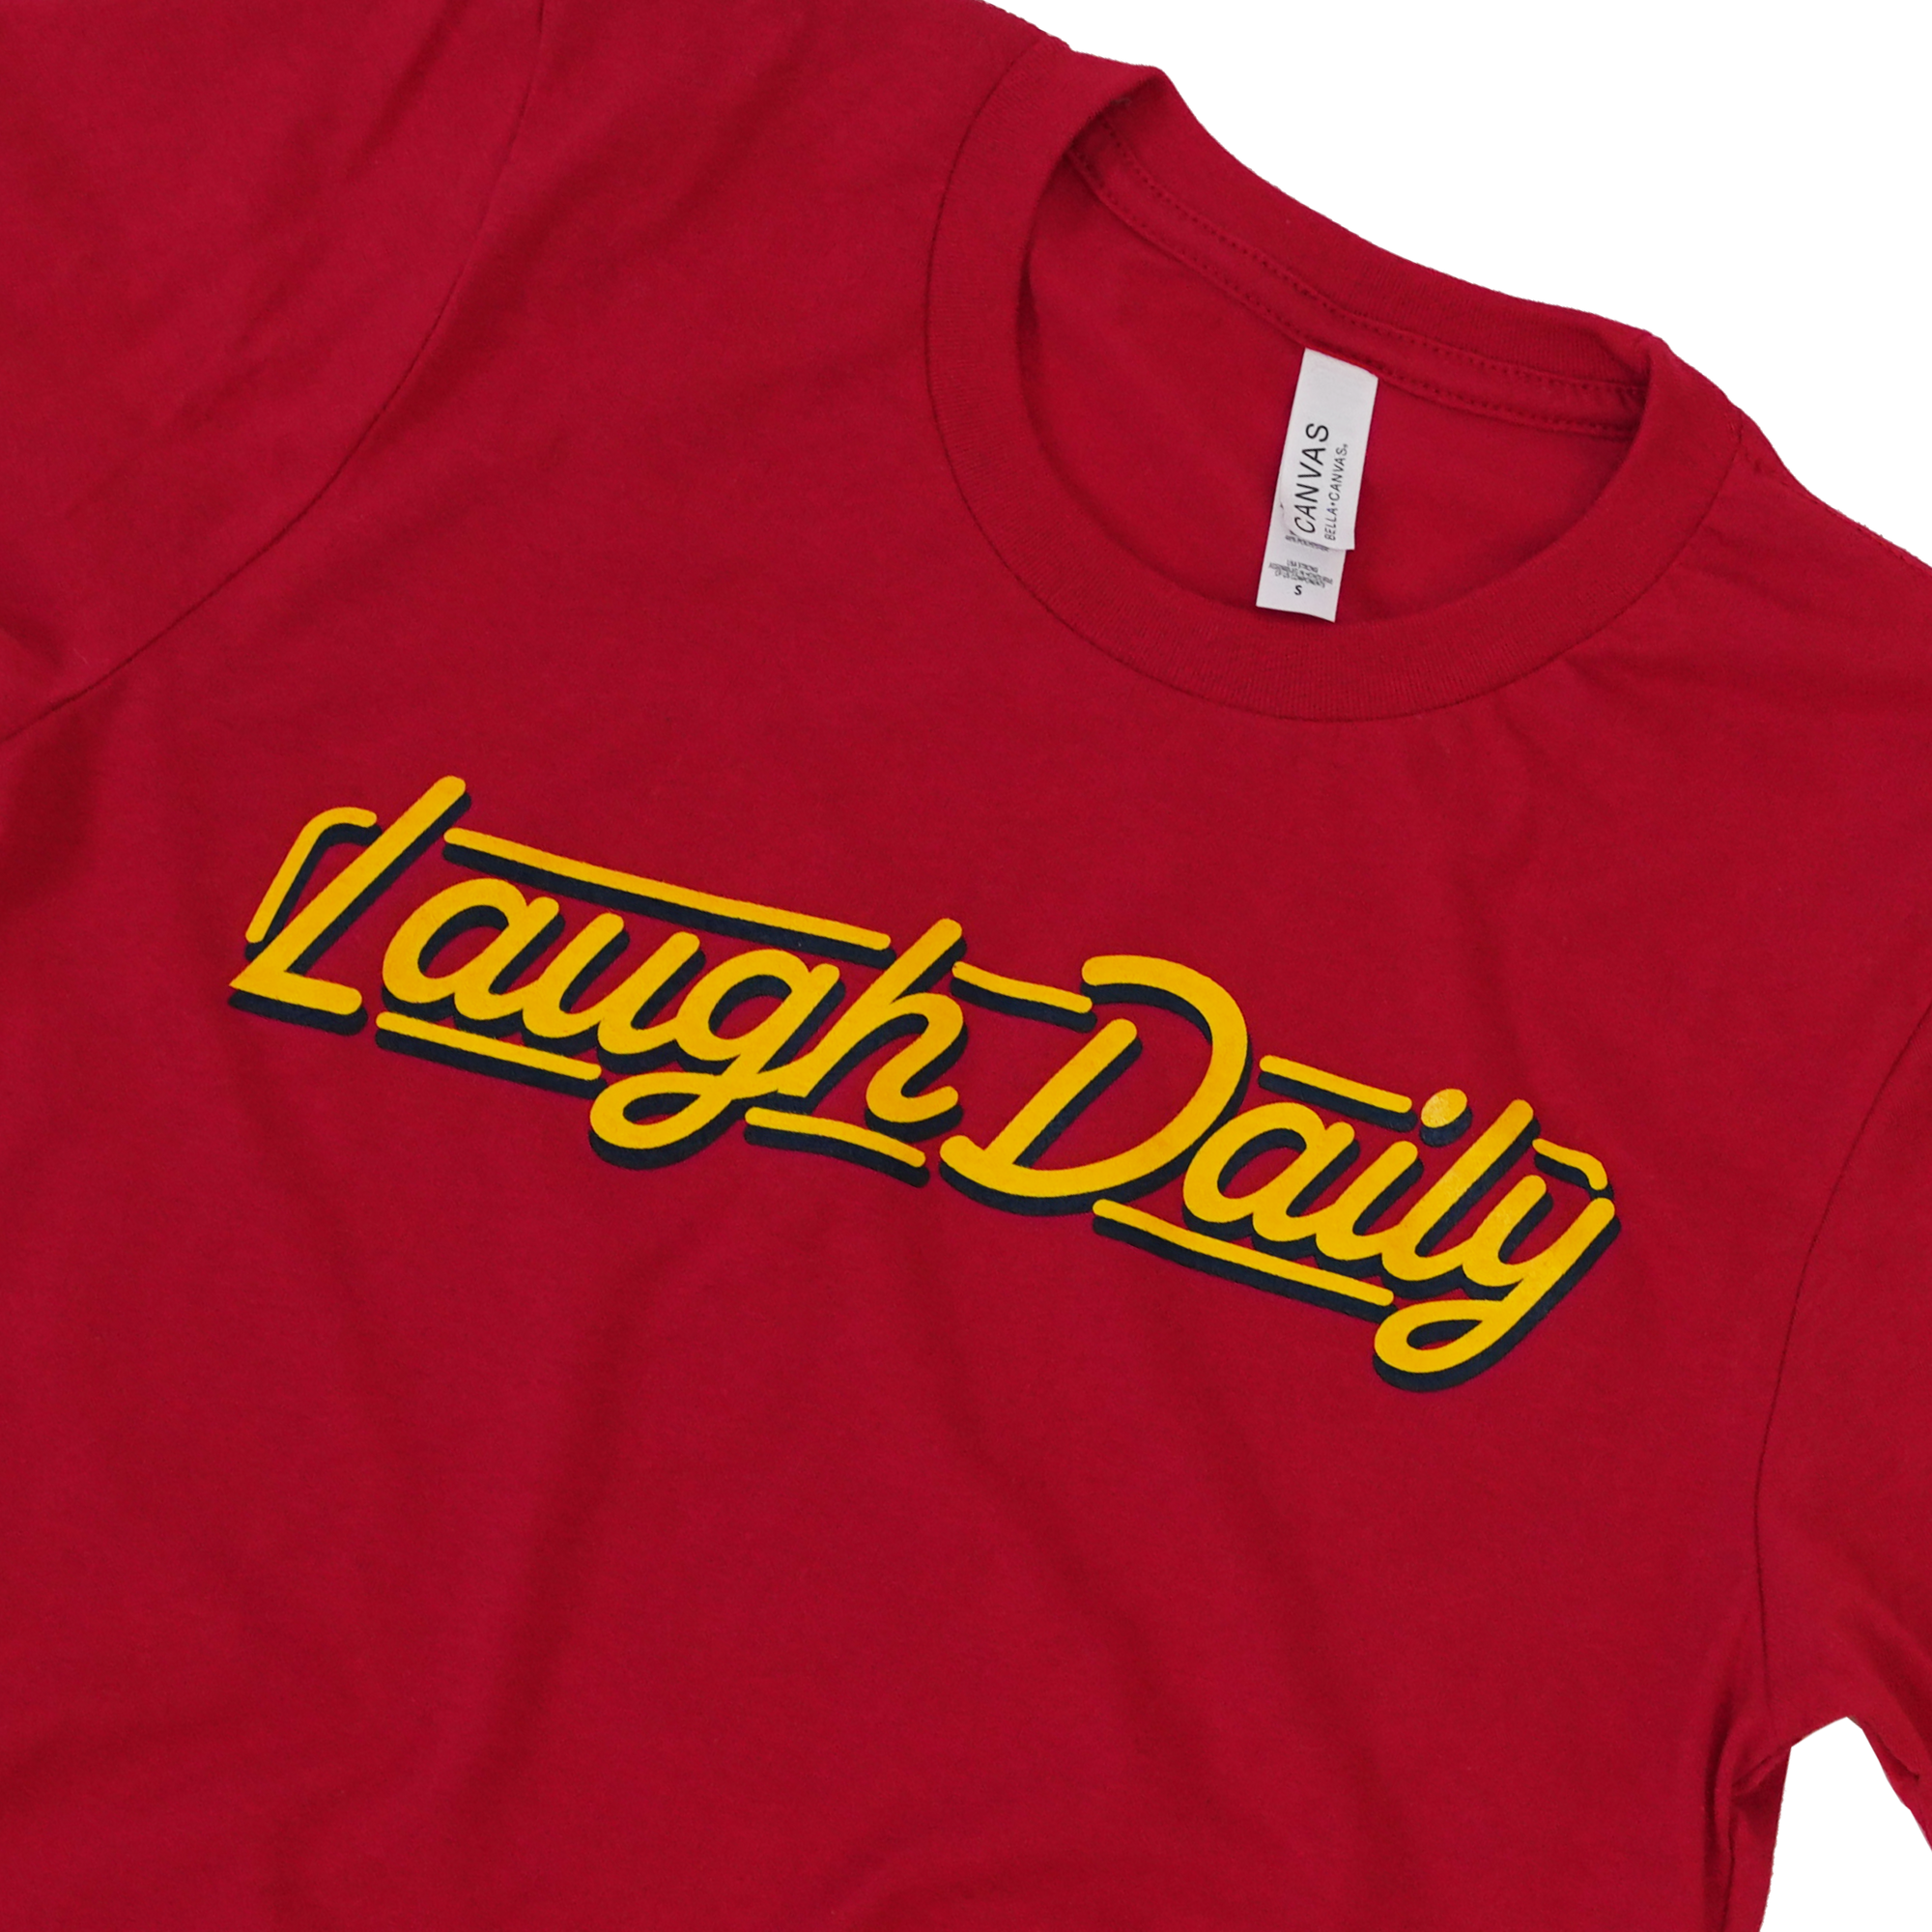 LAUGH DAILY - ADULT